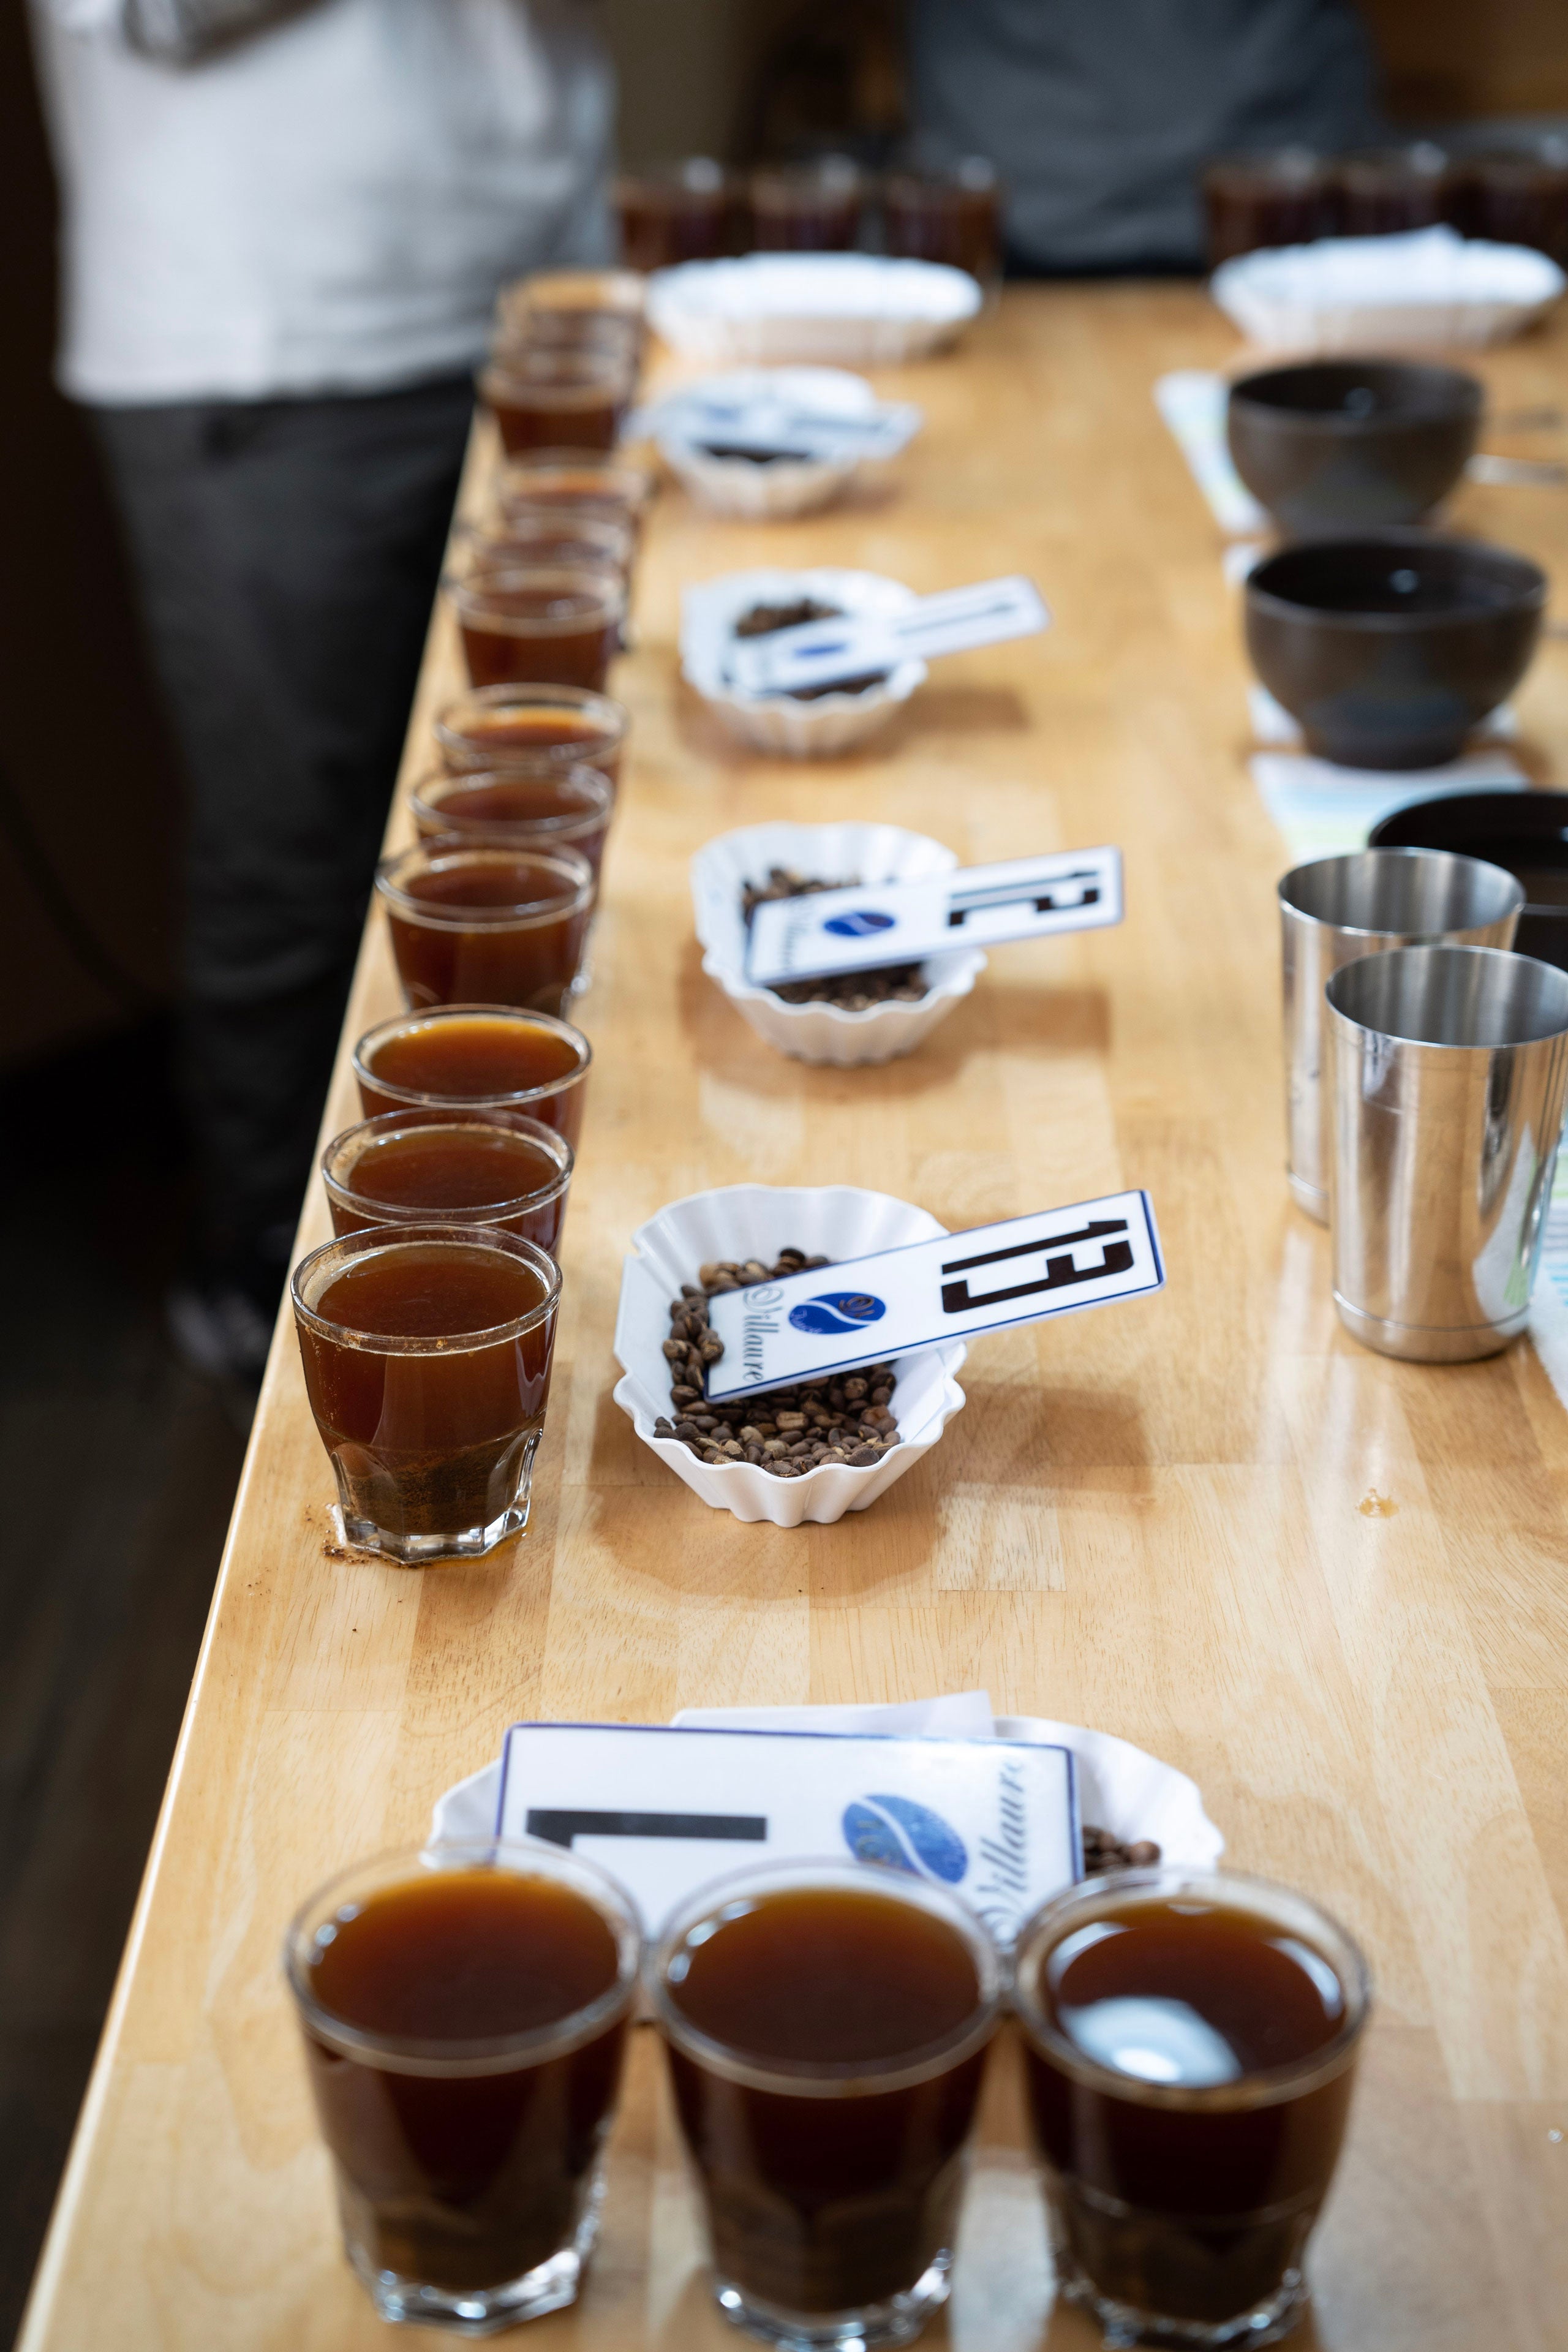 Coffee samples lined up a table for cupping